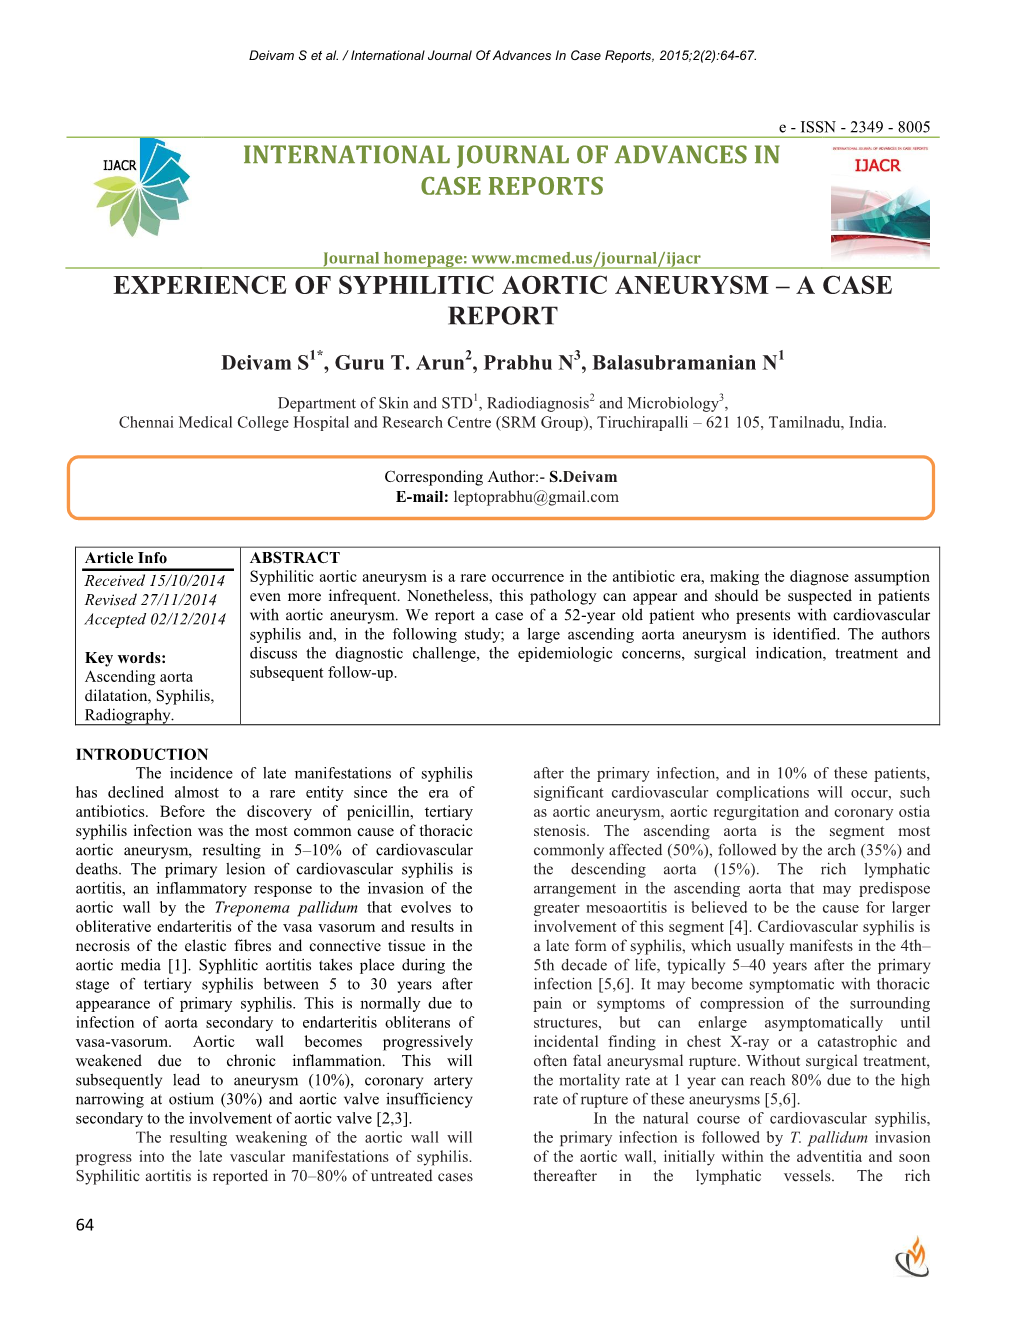 International Journal of Advances in Case Reports, 2015;2(2):64-67